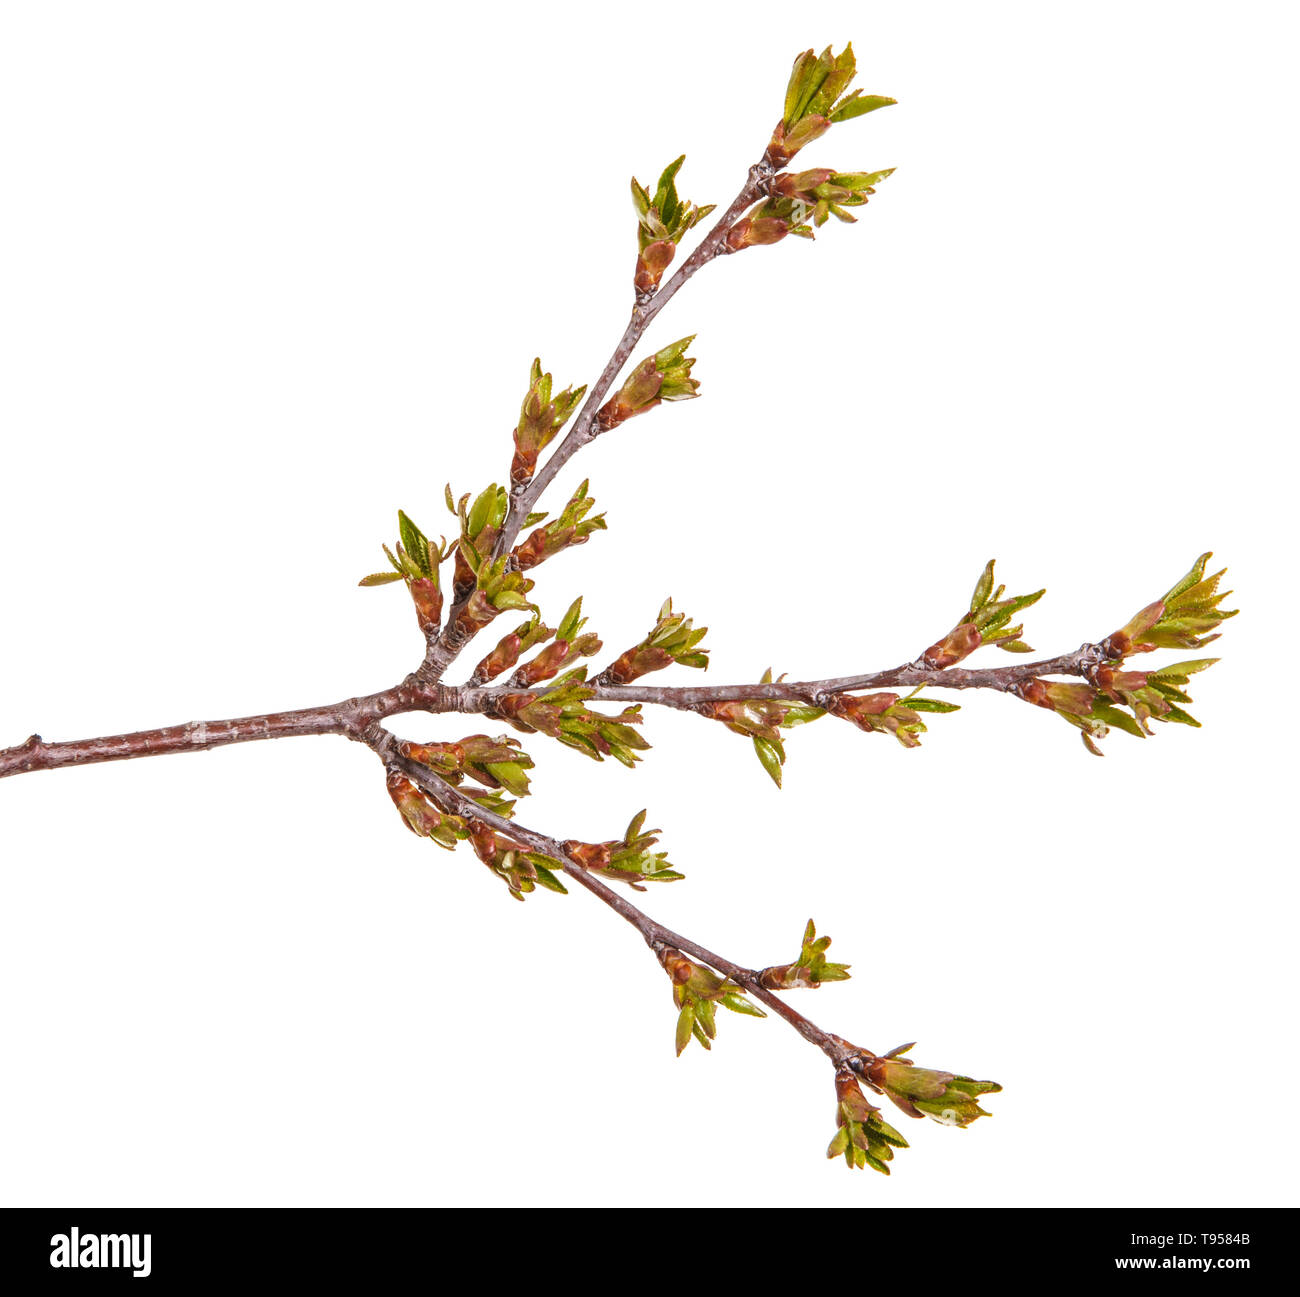 Swollen green buds on a branch of herry tree Stock Photo